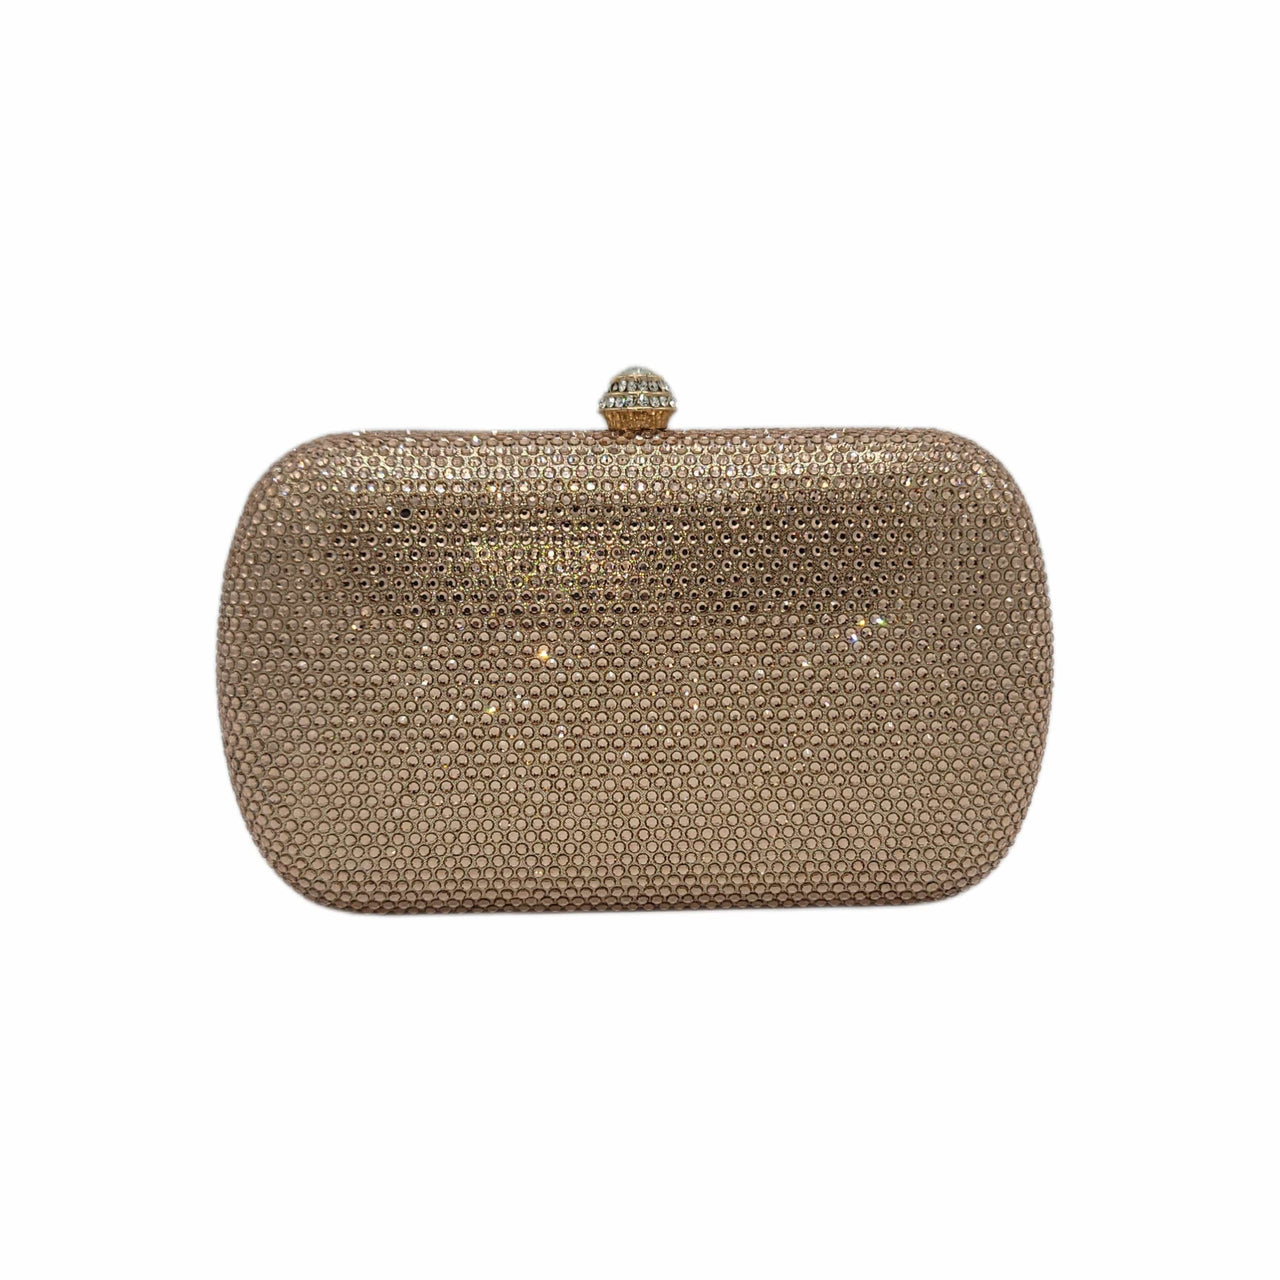 The Bag Couture Handbags, Wallets & Cases Stone Embellished Clutch 1 Golden